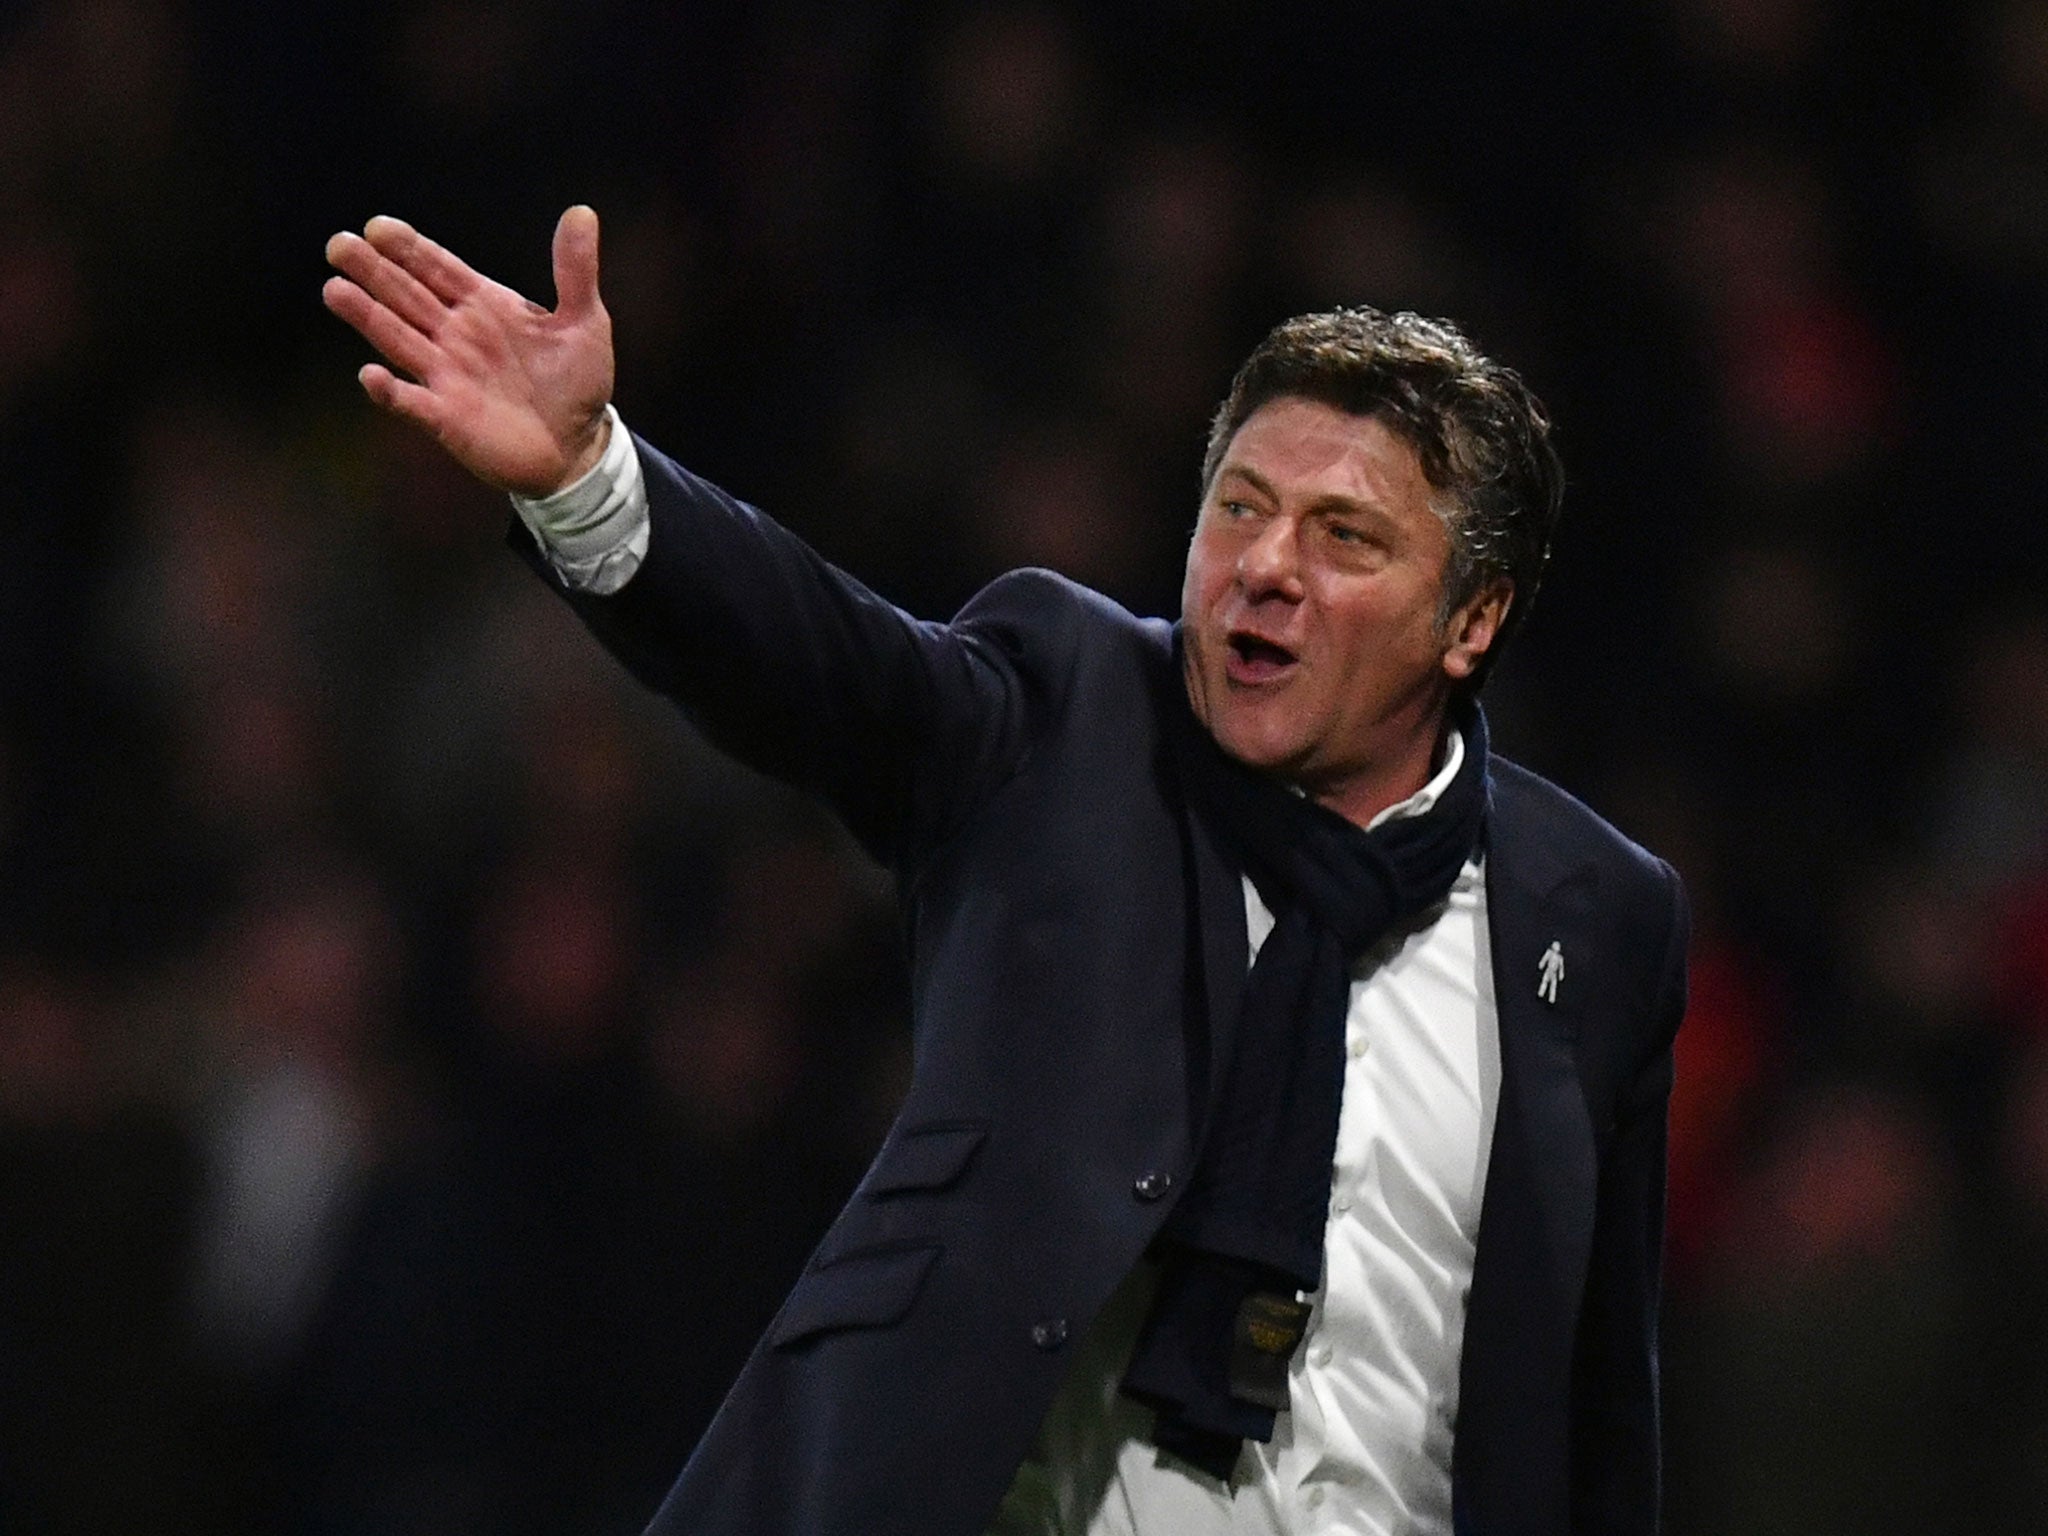 Walter Mazzarri will leave Watford after this weekend's final Premier League match against Manchester City